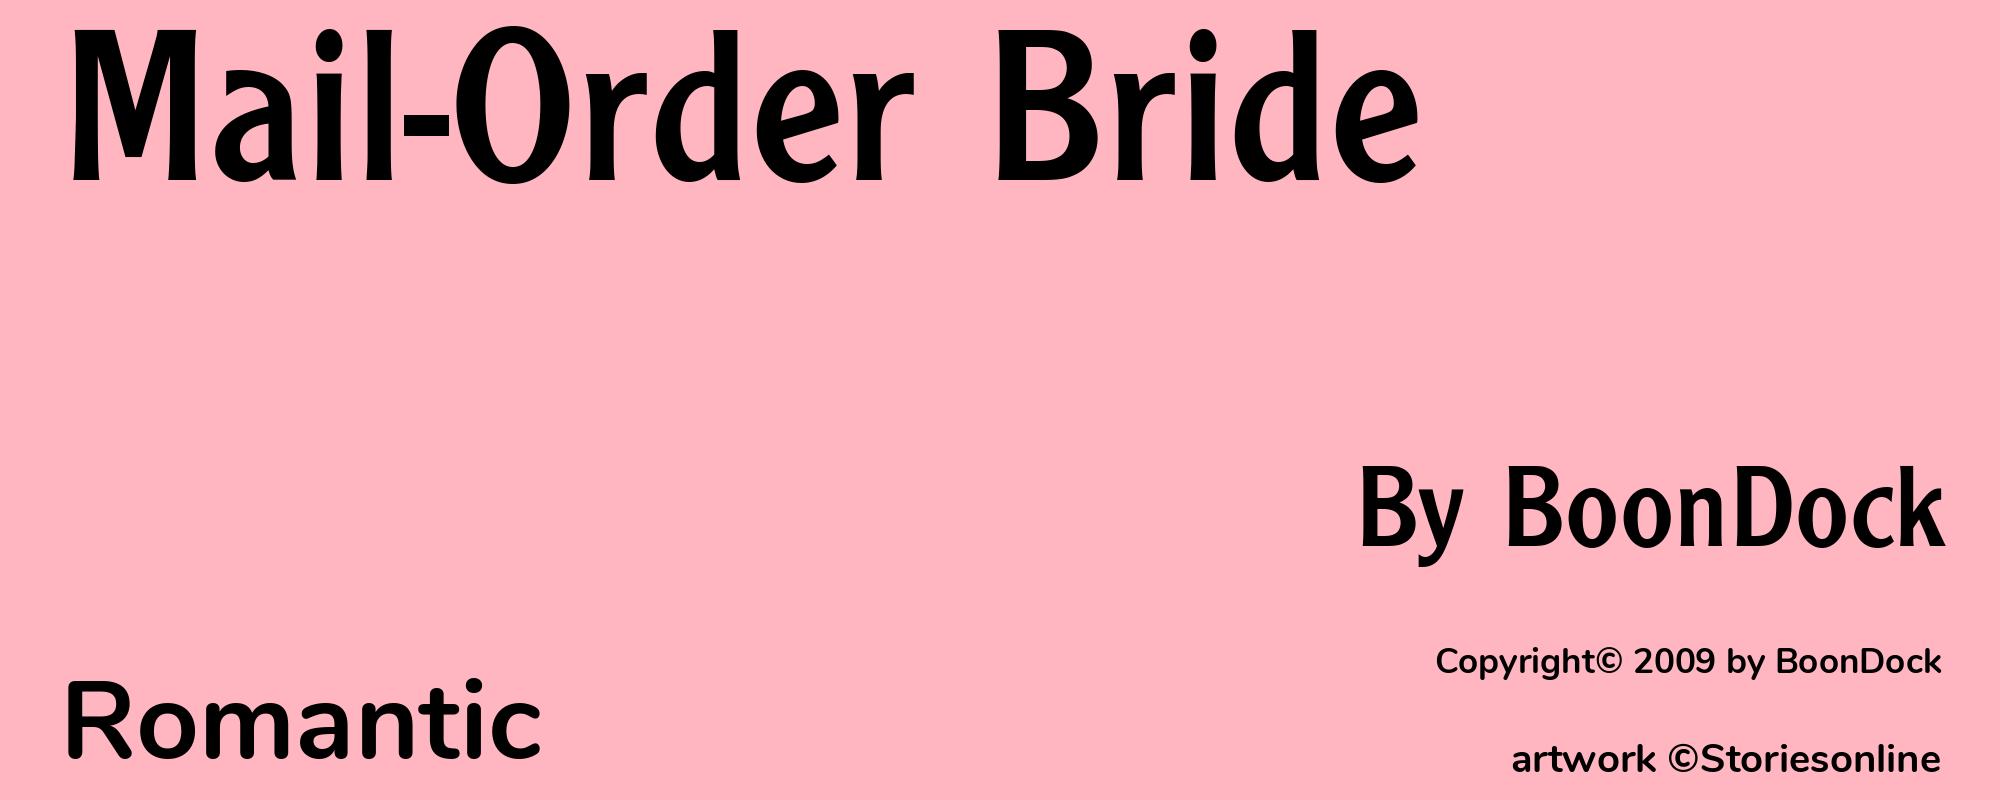 Mail-Order Bride - Cover